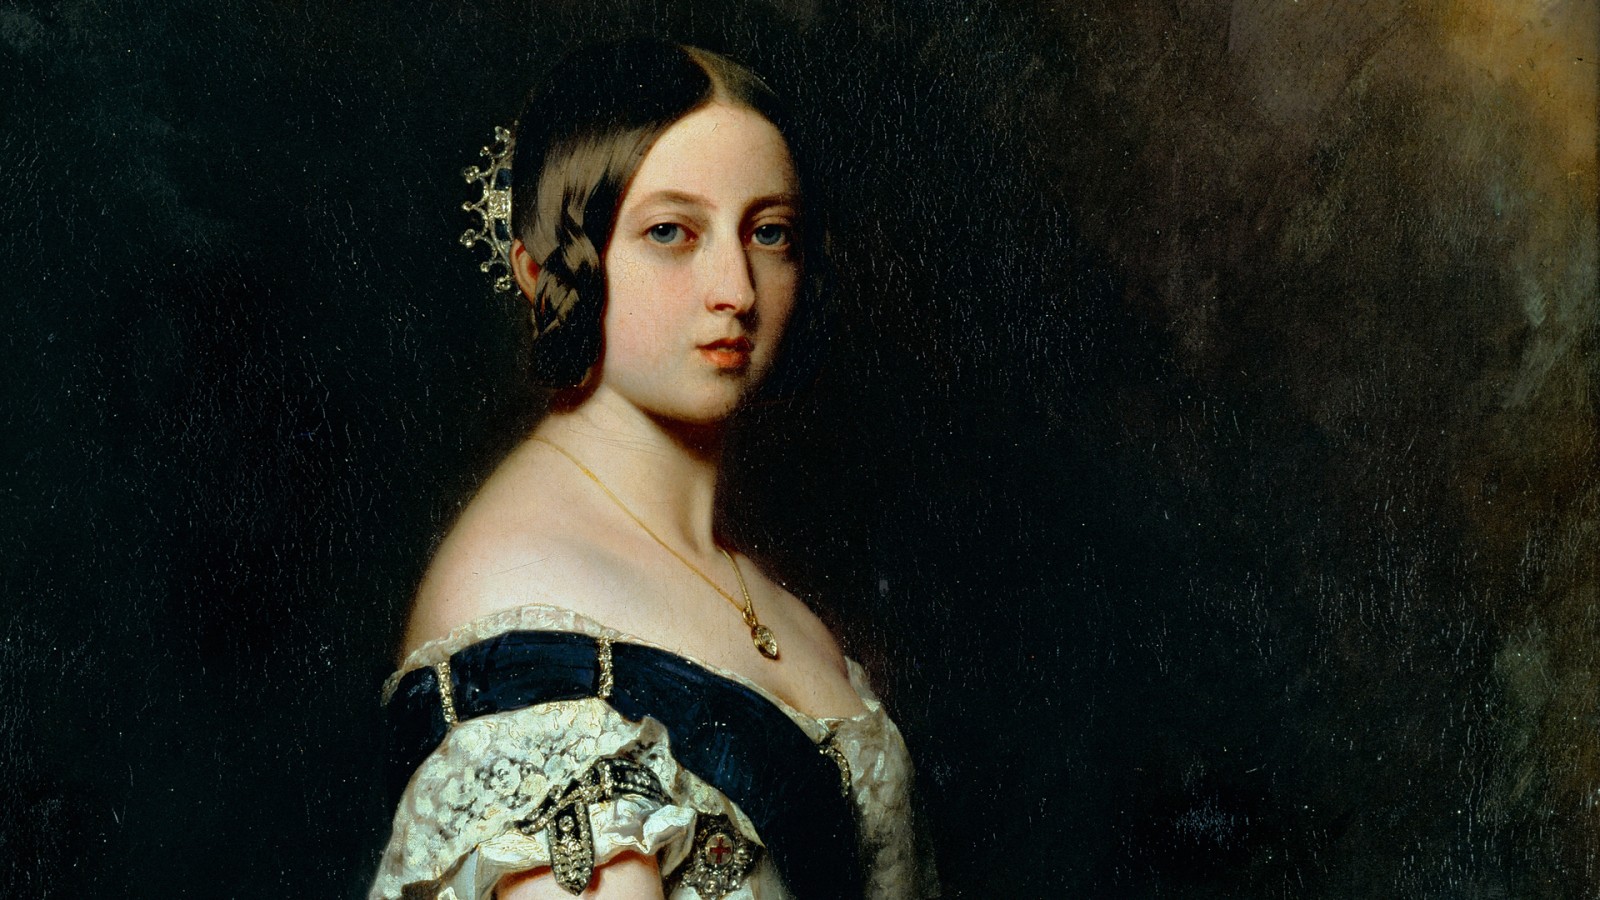 Queen Victoria (1837-1901) is widely reported as being naturally left-handed and, while she wrote with her right hand, she painted with her left, which is a good sign of a forced change.